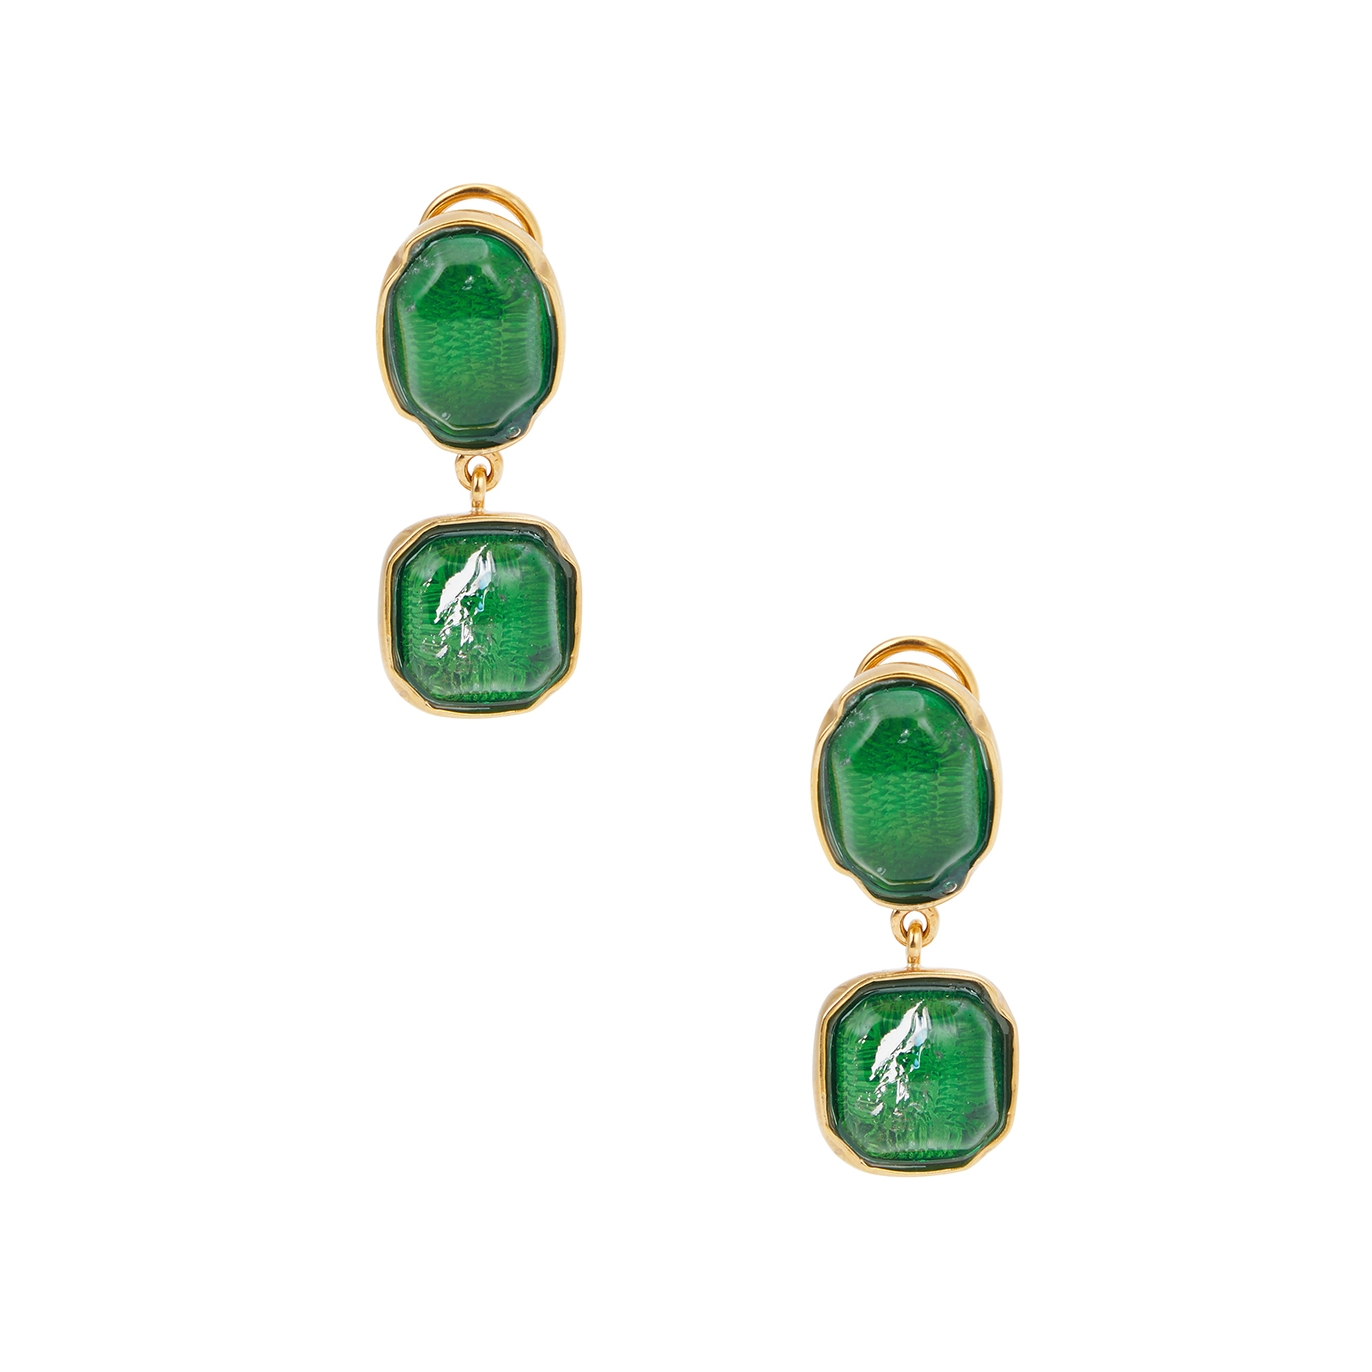 Goossens 24kt Gold-dipped Clip-on Drop Earrings - Green - One Size